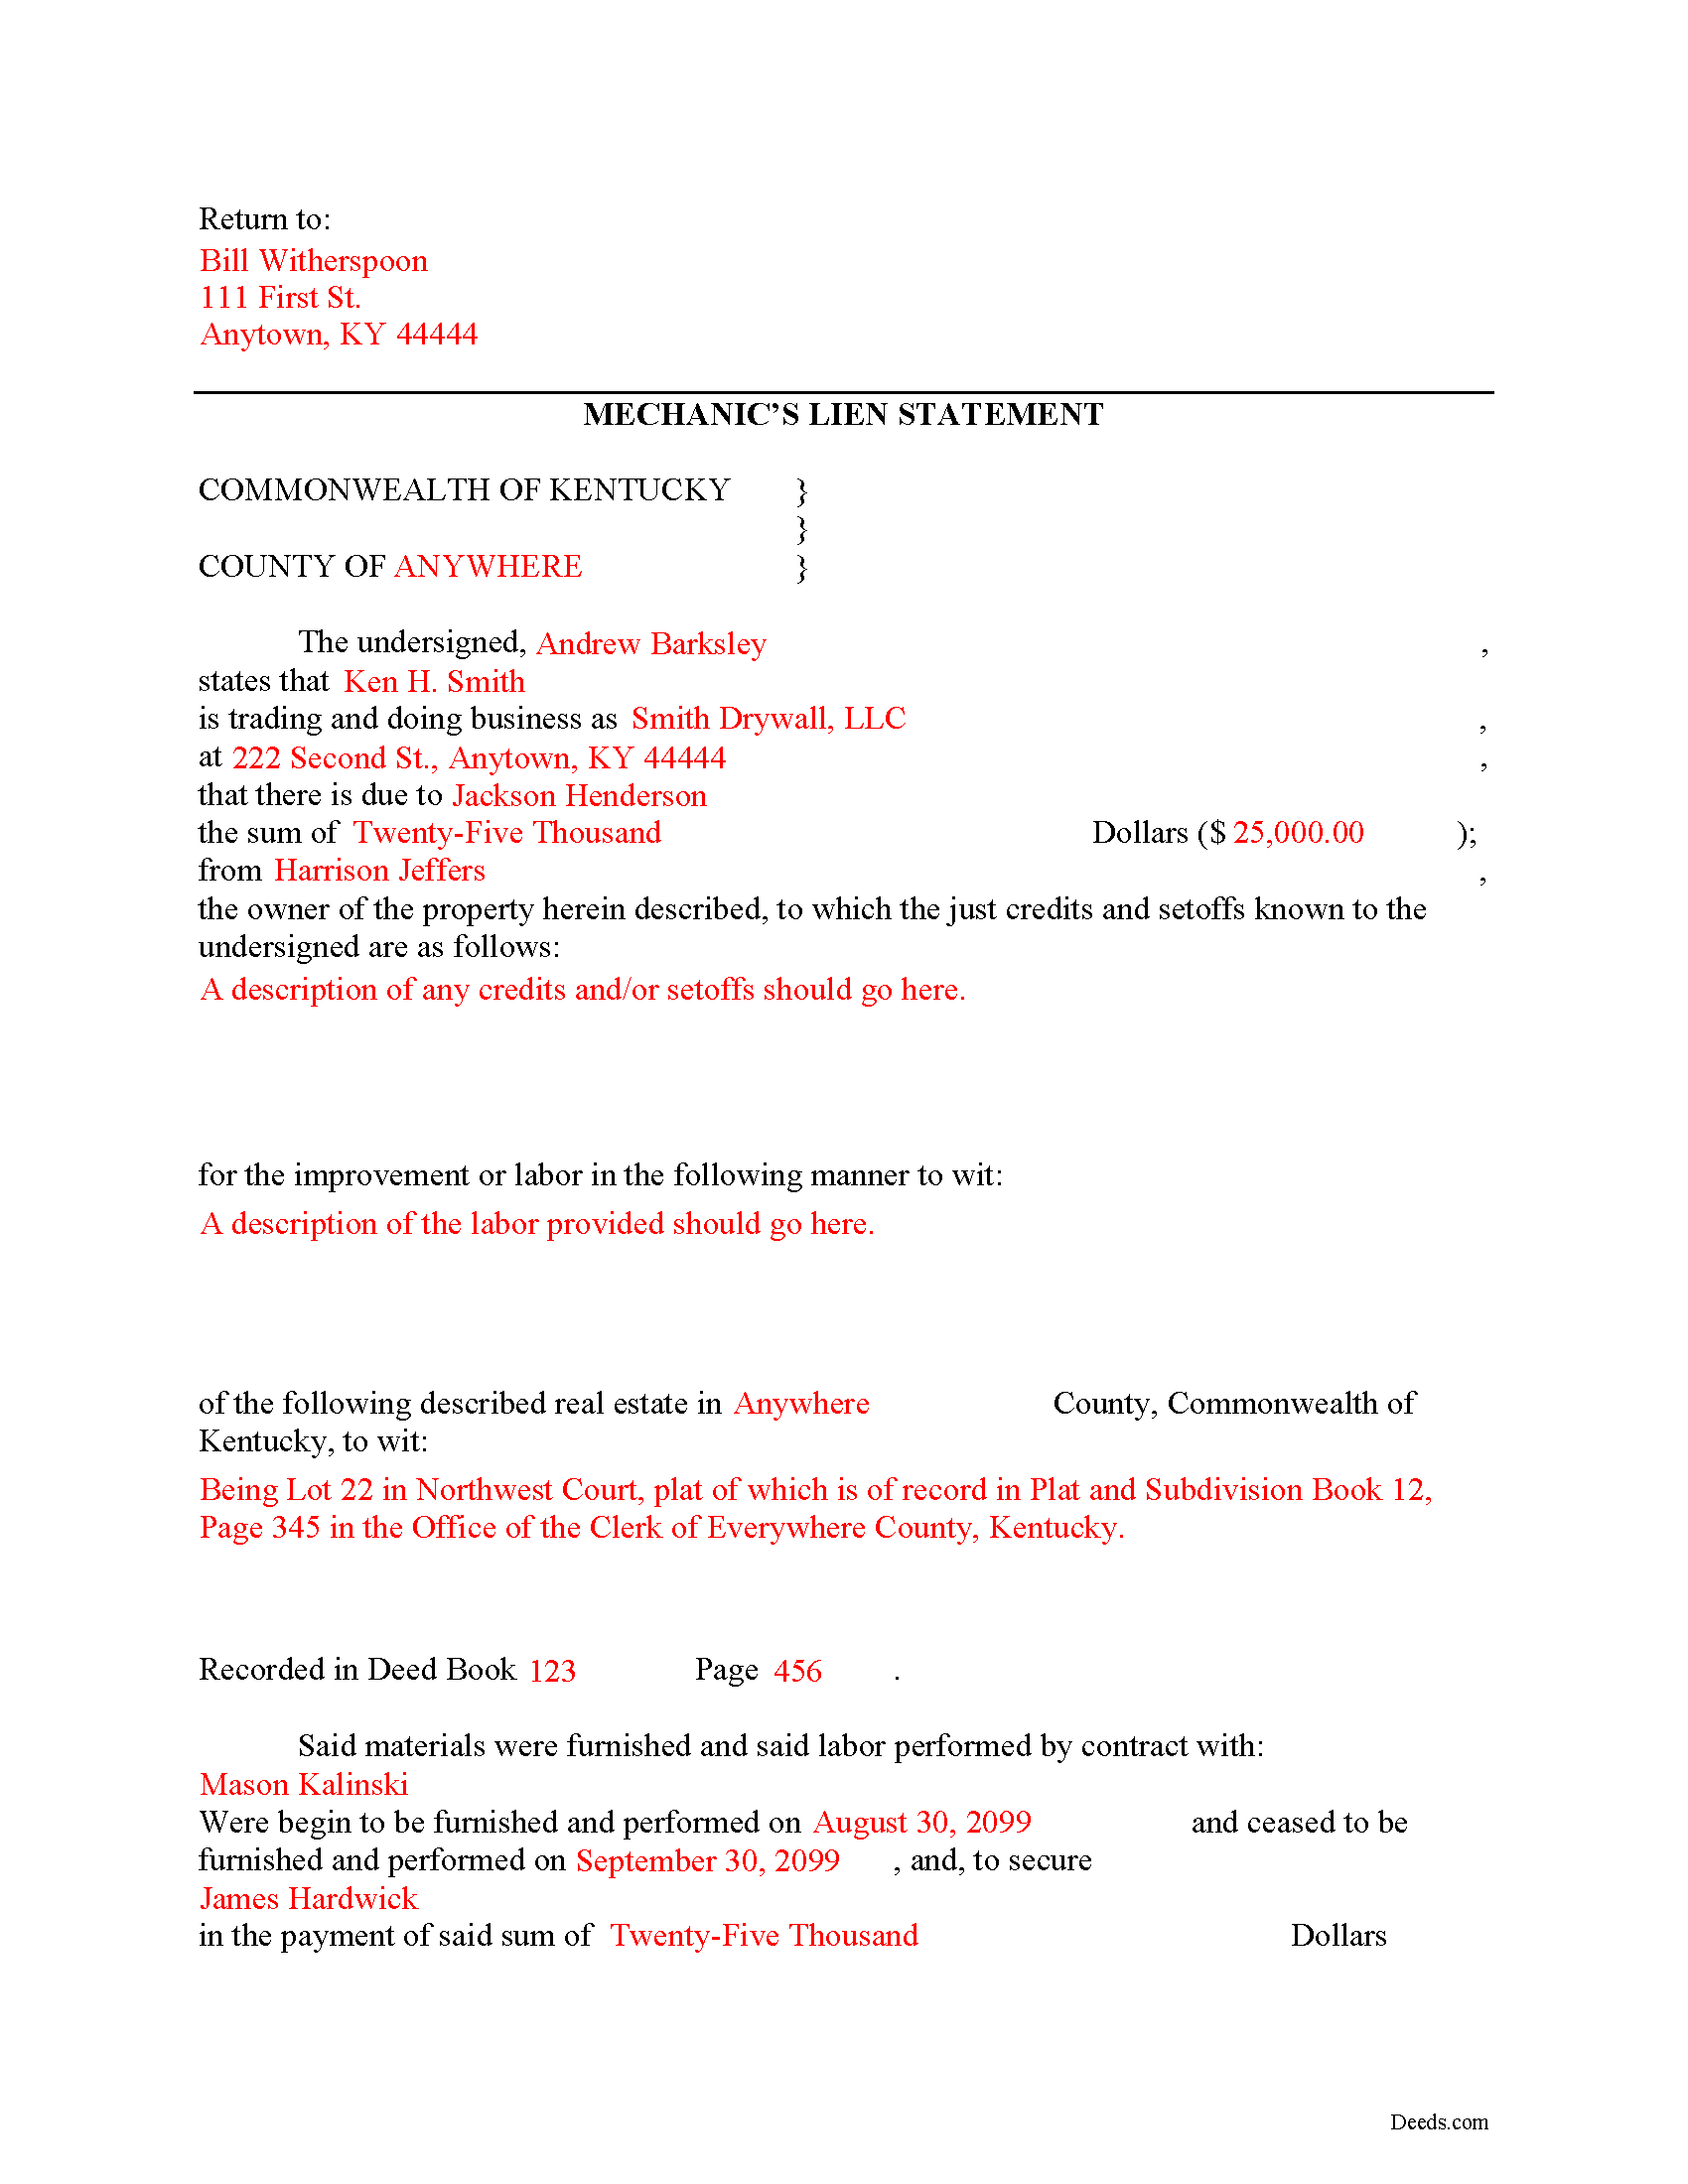 Completed Example of the Mechanics Lien Document